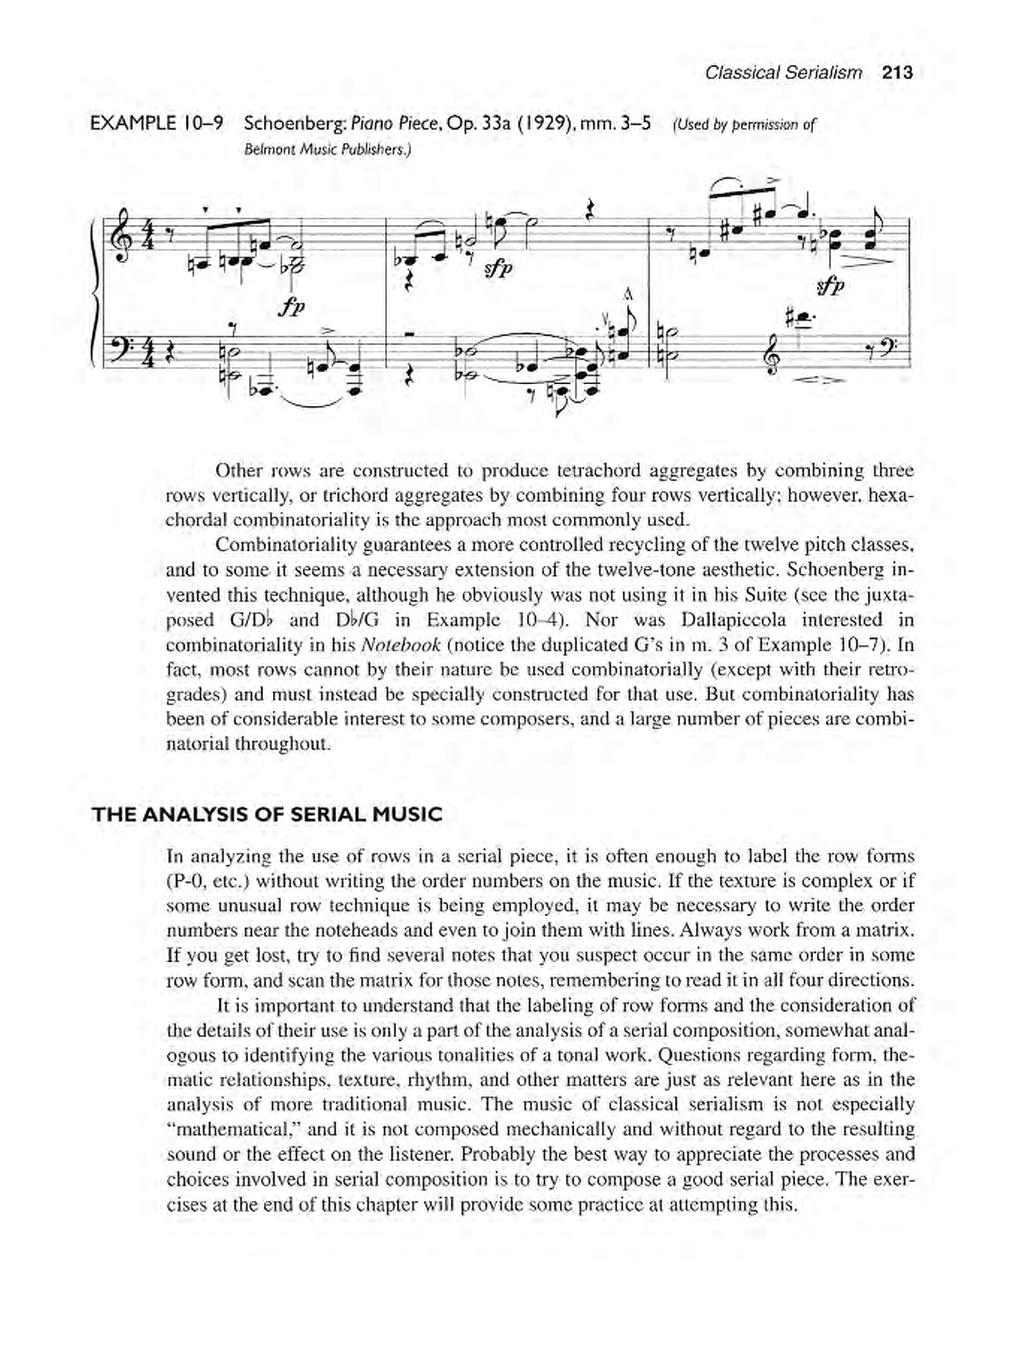 Classical Serialism 213 EXAMPLE I ()-9 Schoenberg: Piano Piece, Op. 33a (1929), mm. 3-5 (Used by p"m;ss;on of Belmom Music Publishers.